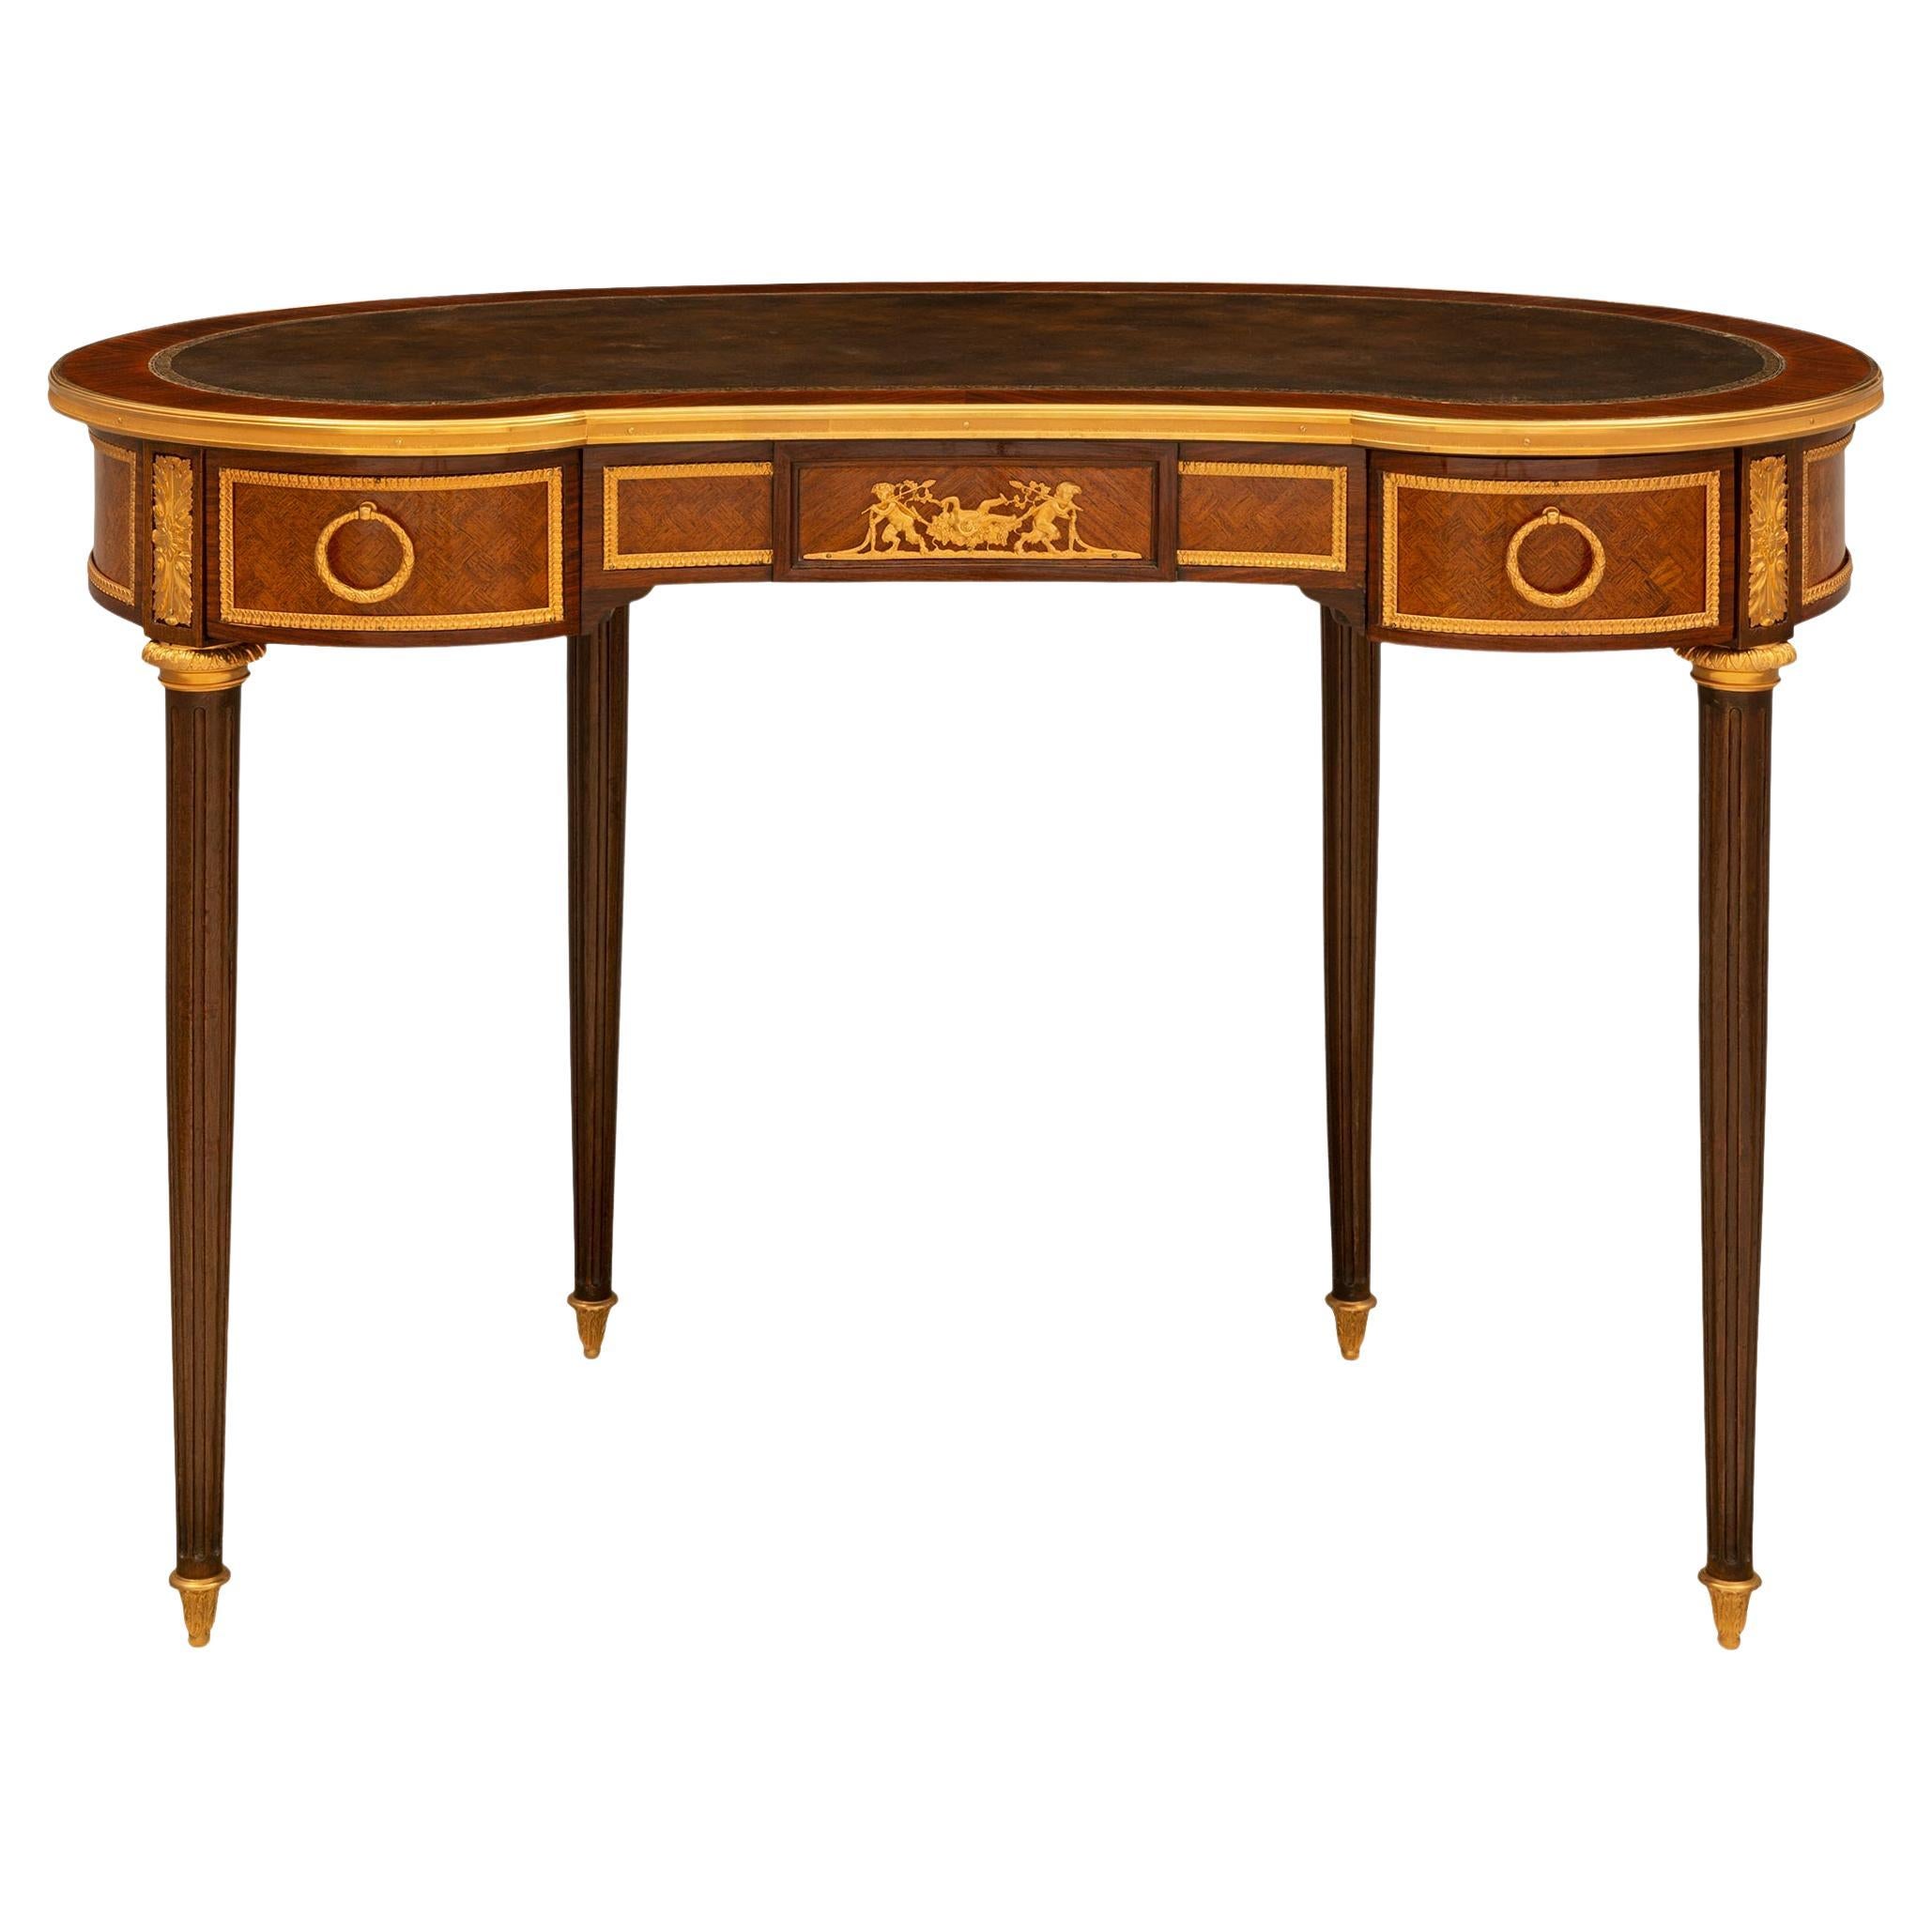 French 19th Century Tulipwood Parquetry Desk, Attributed to Linke For Sale